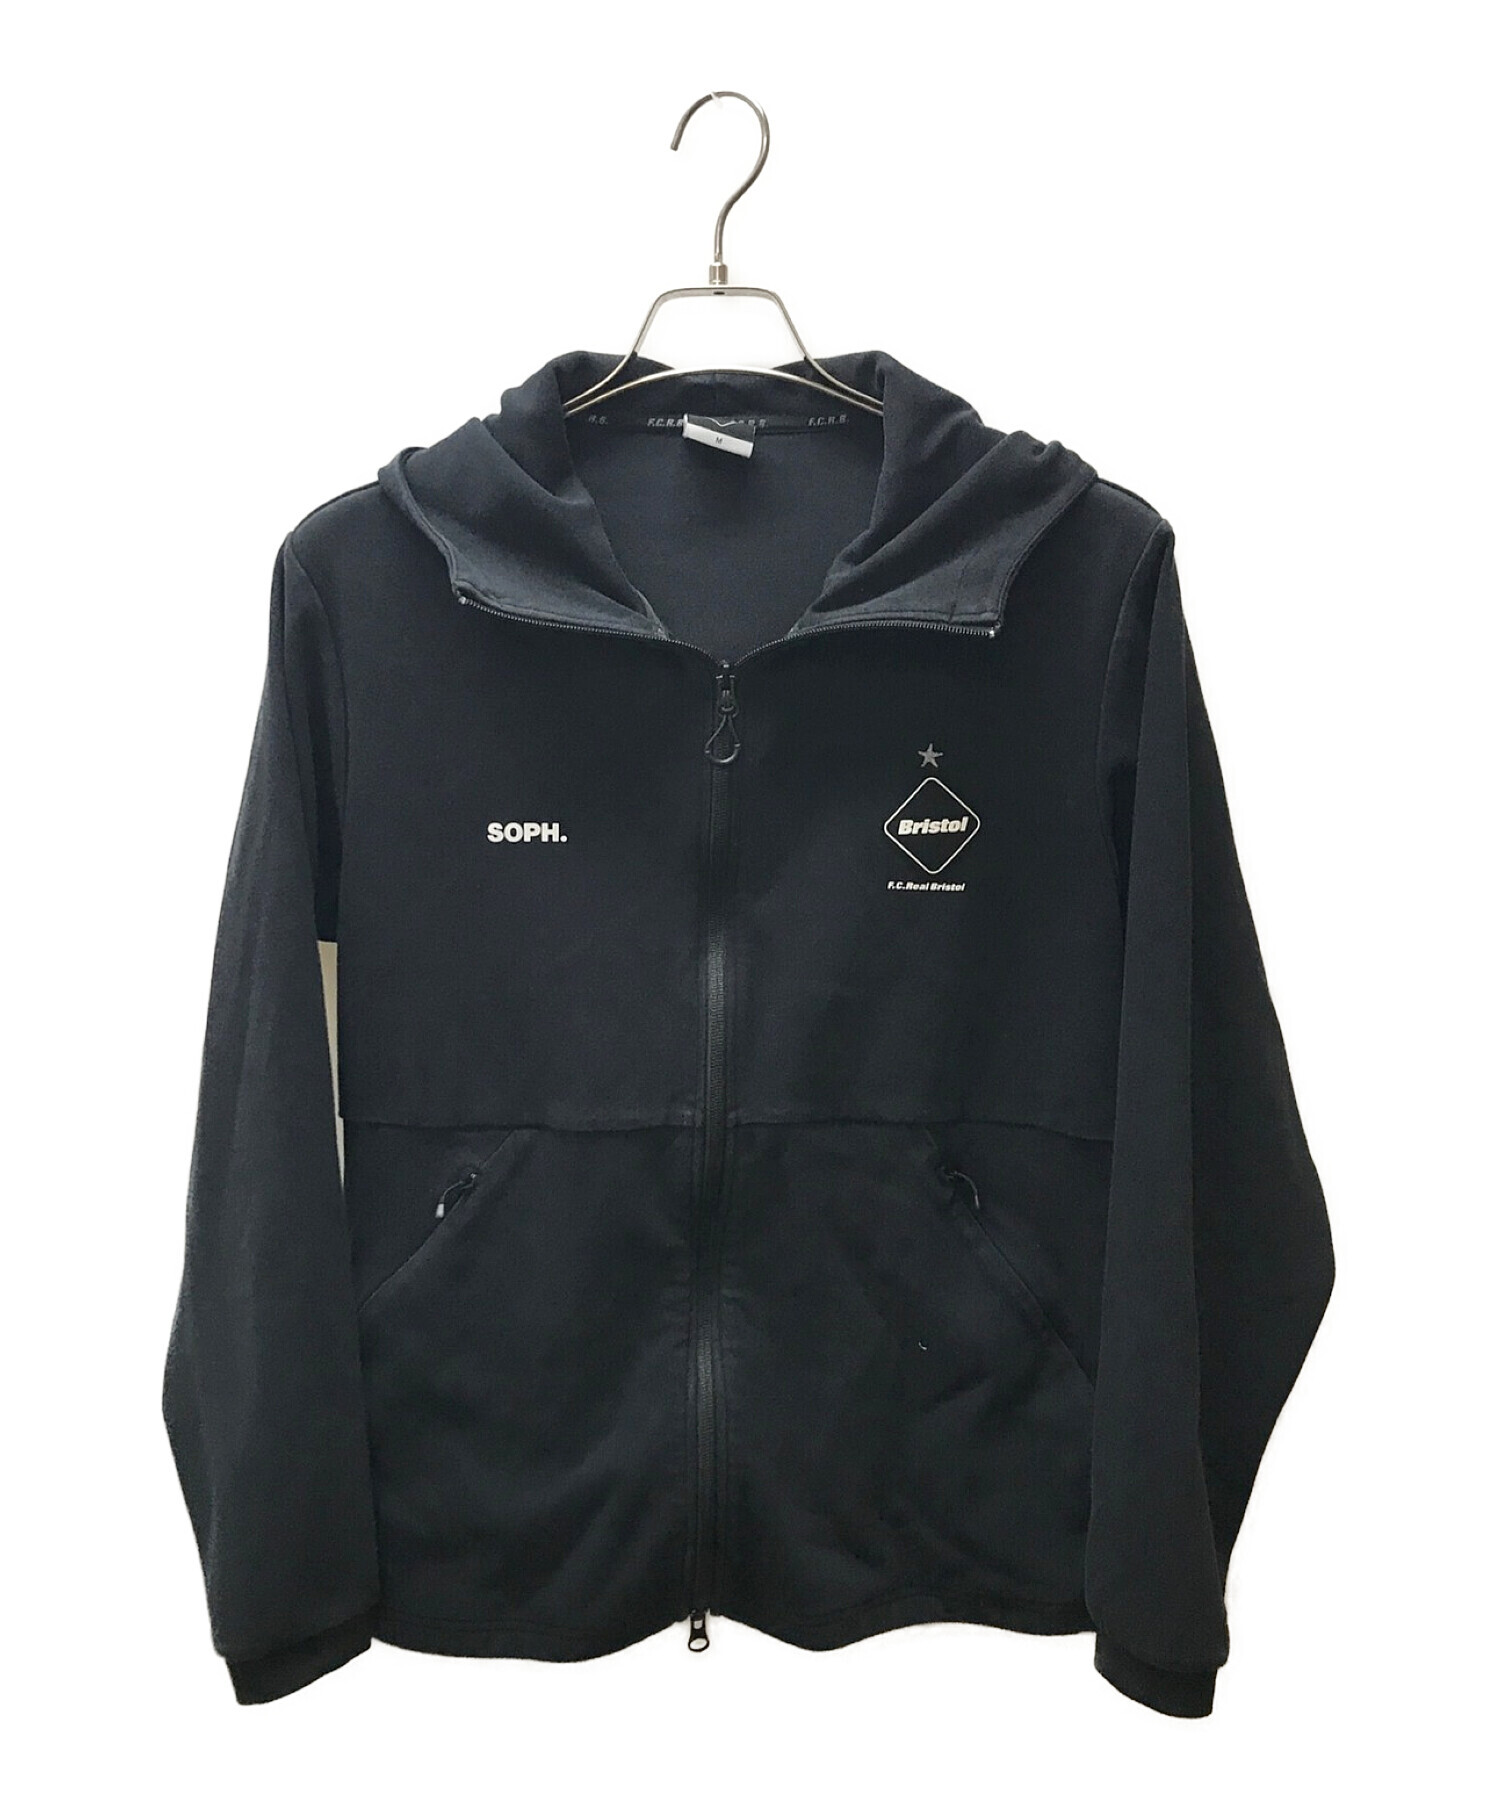 FCRB ブリストル RELAX FIT ZIP UP HOODIE M